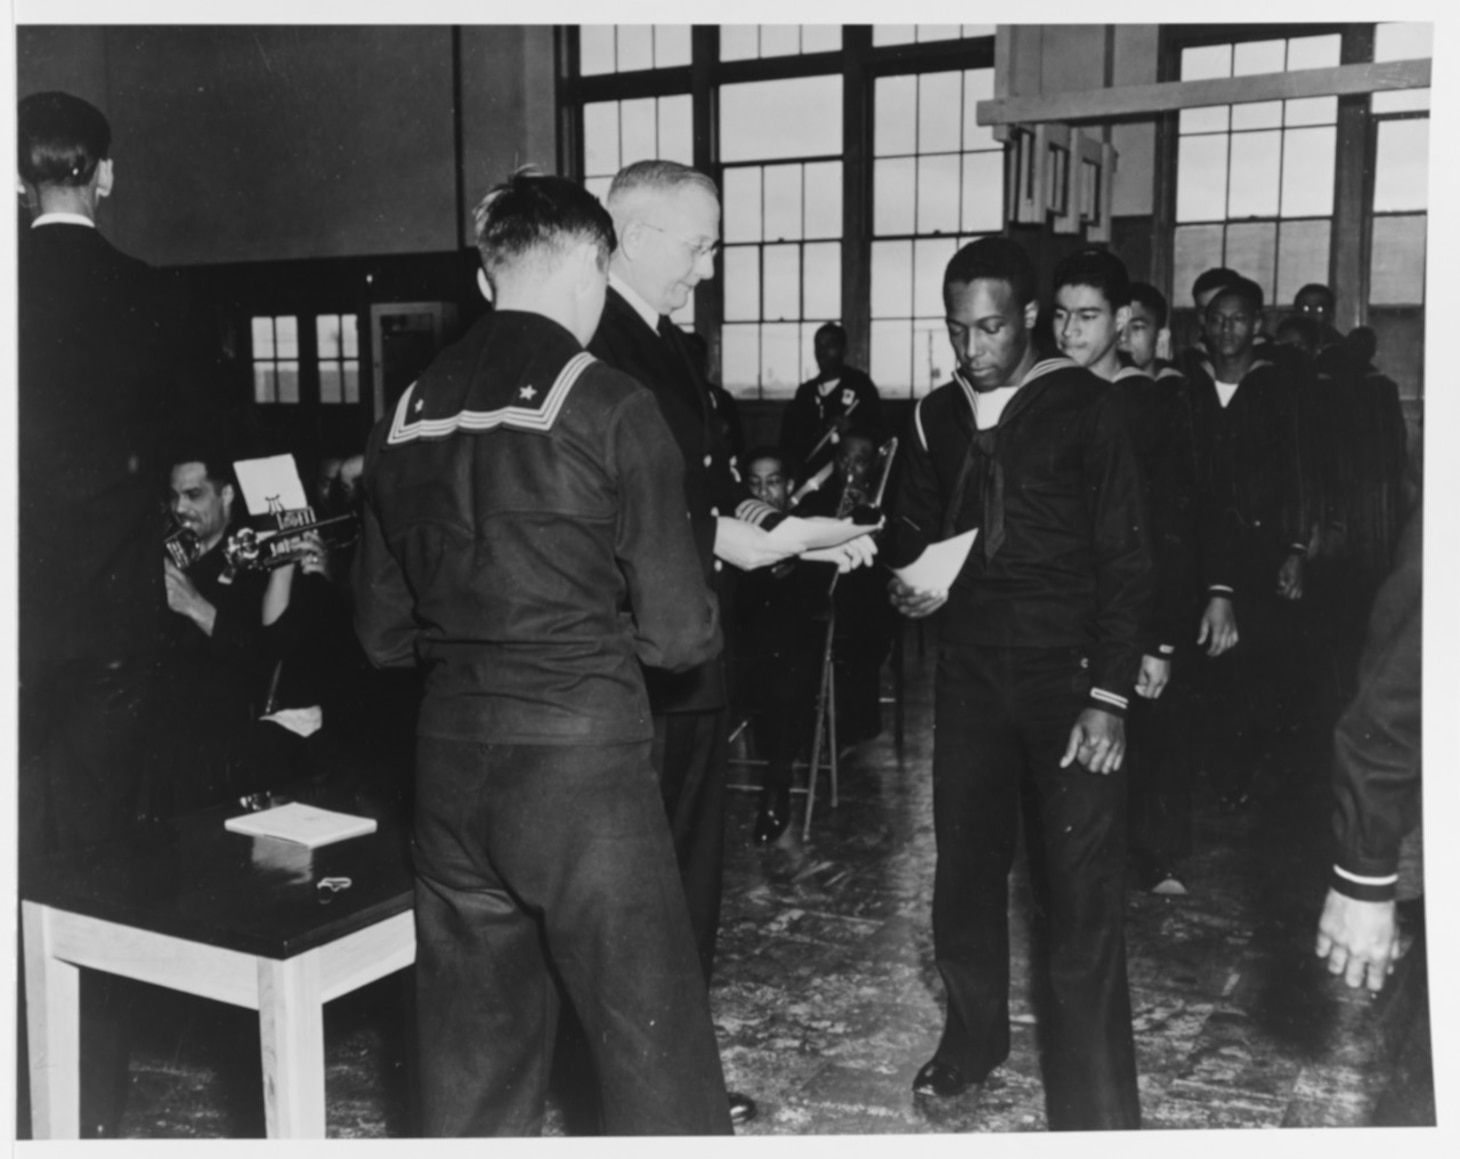 Sailors receive certificates at graduation exercises for the sixth African American class at the Great Lakes Naval Training Station, ca. April 1943.